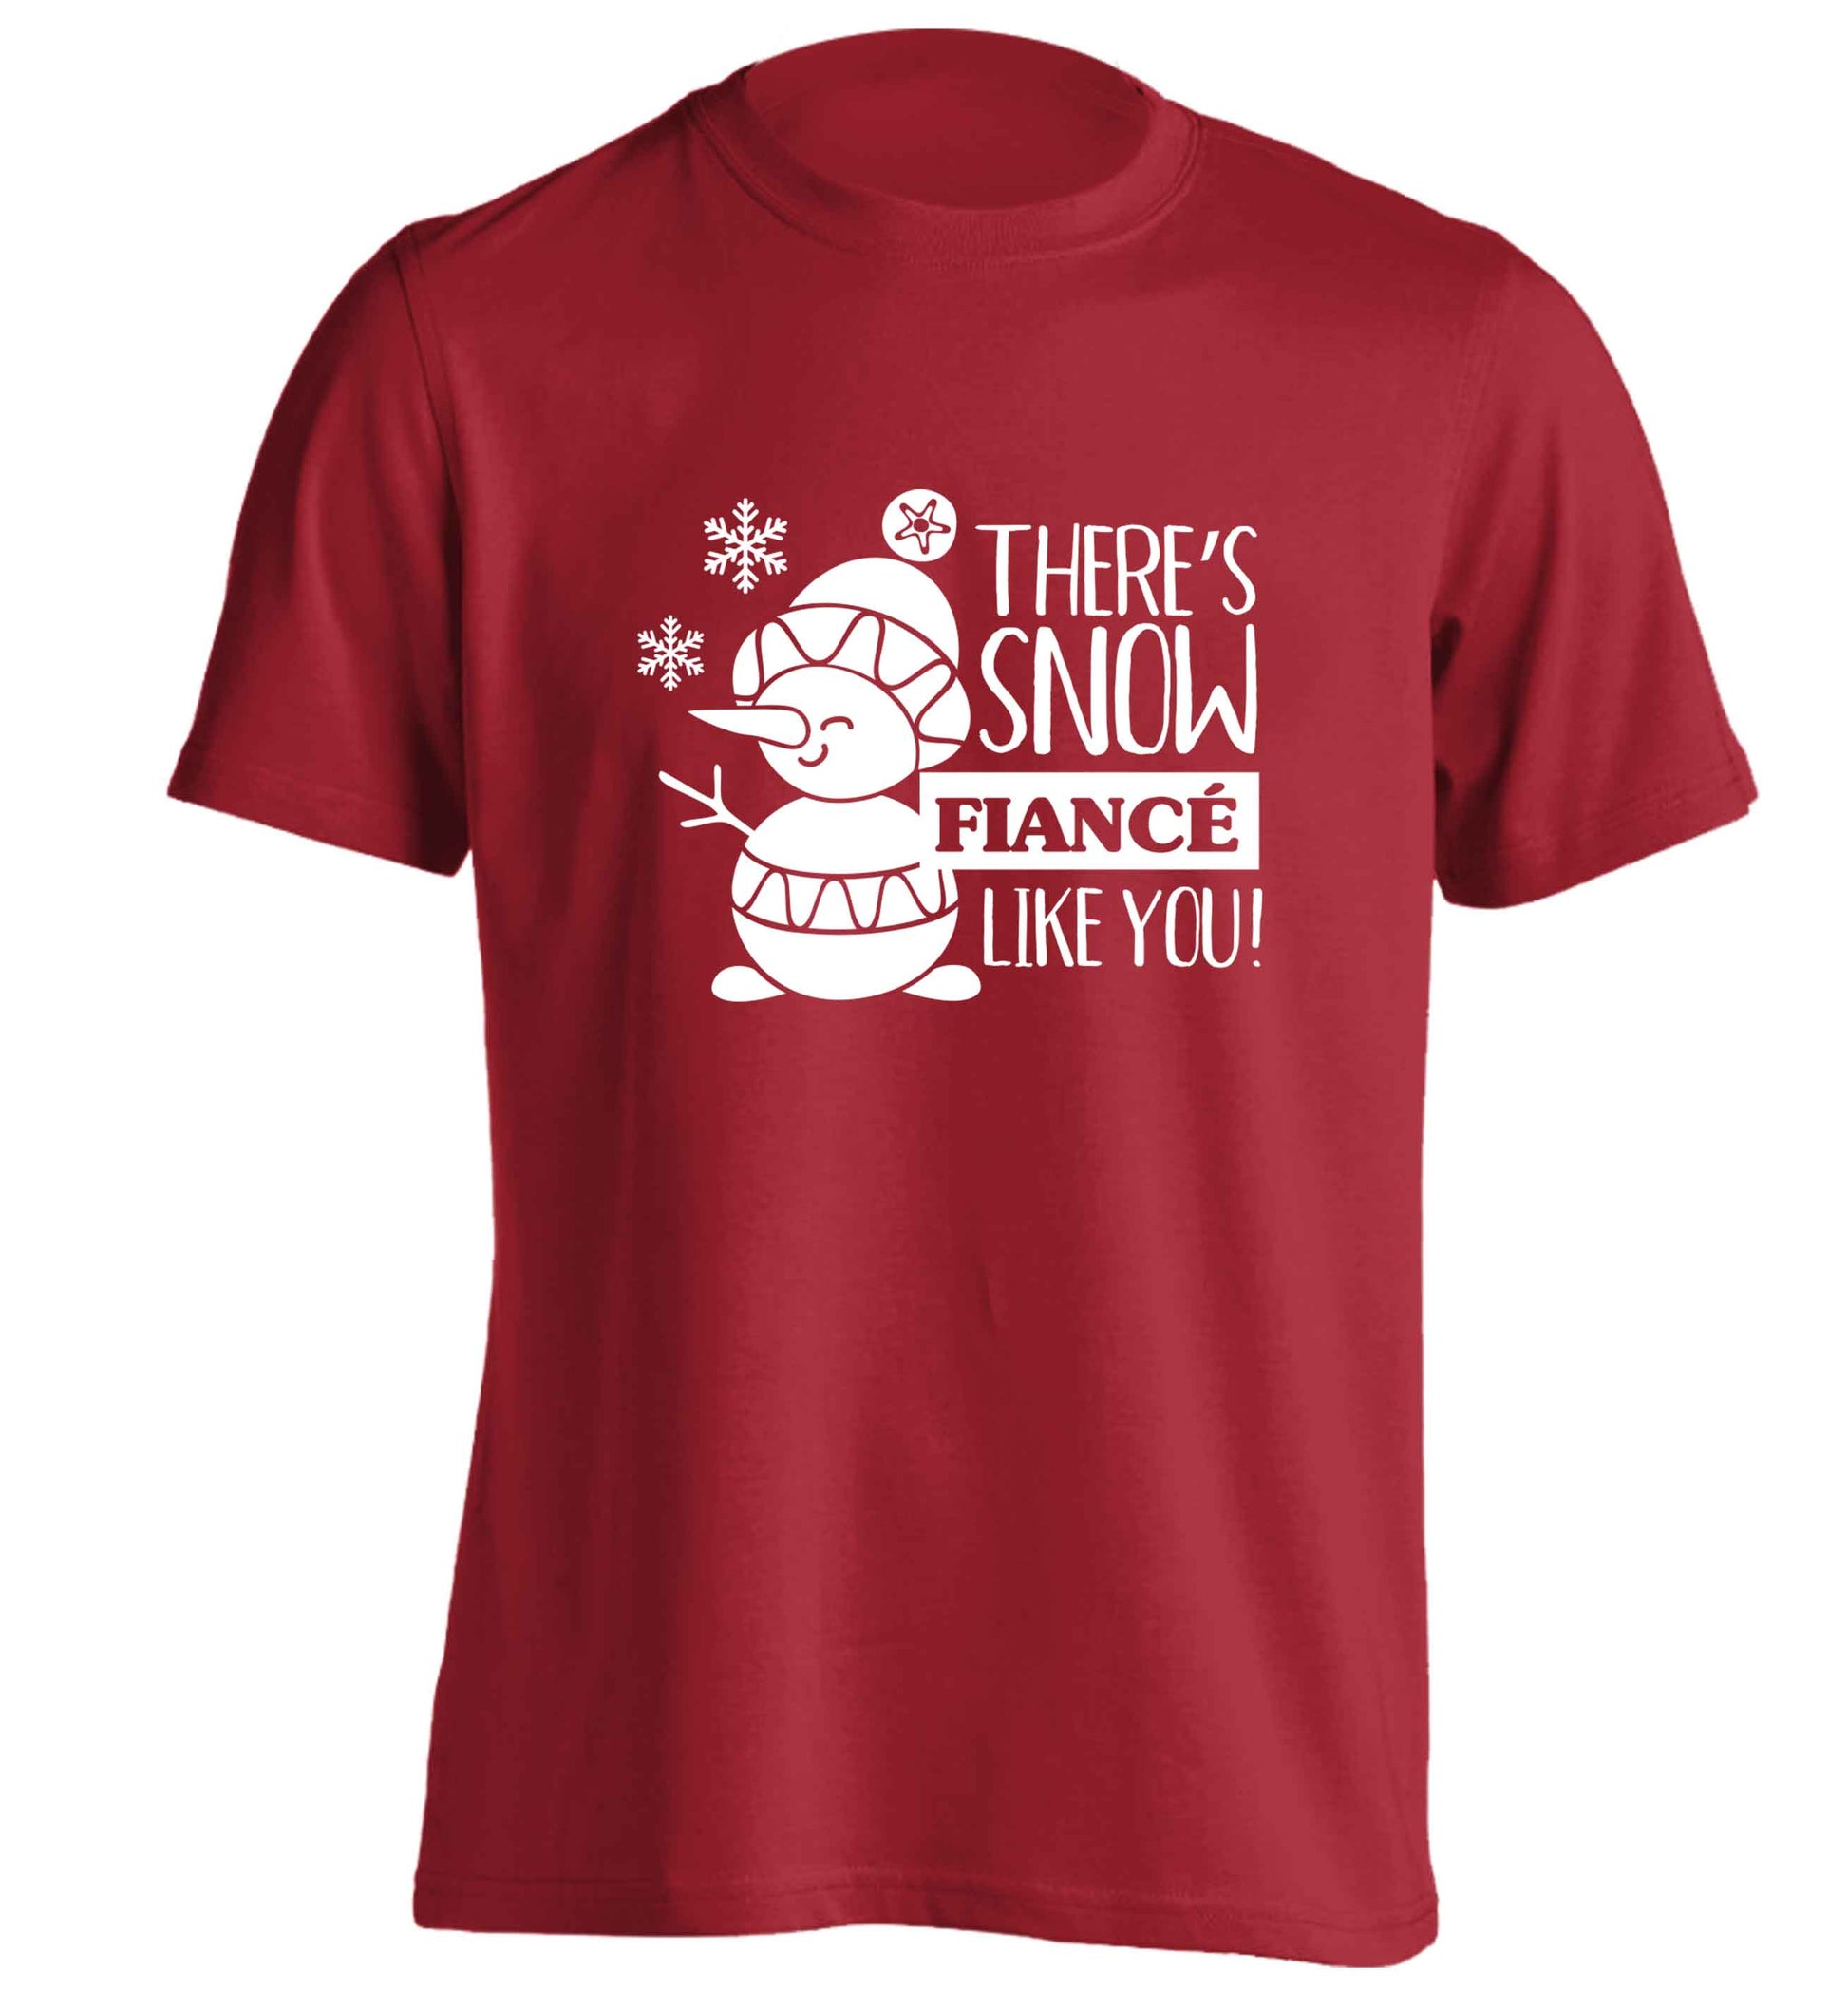 There's snow fiance like you adults unisex red Tshirt 2XL